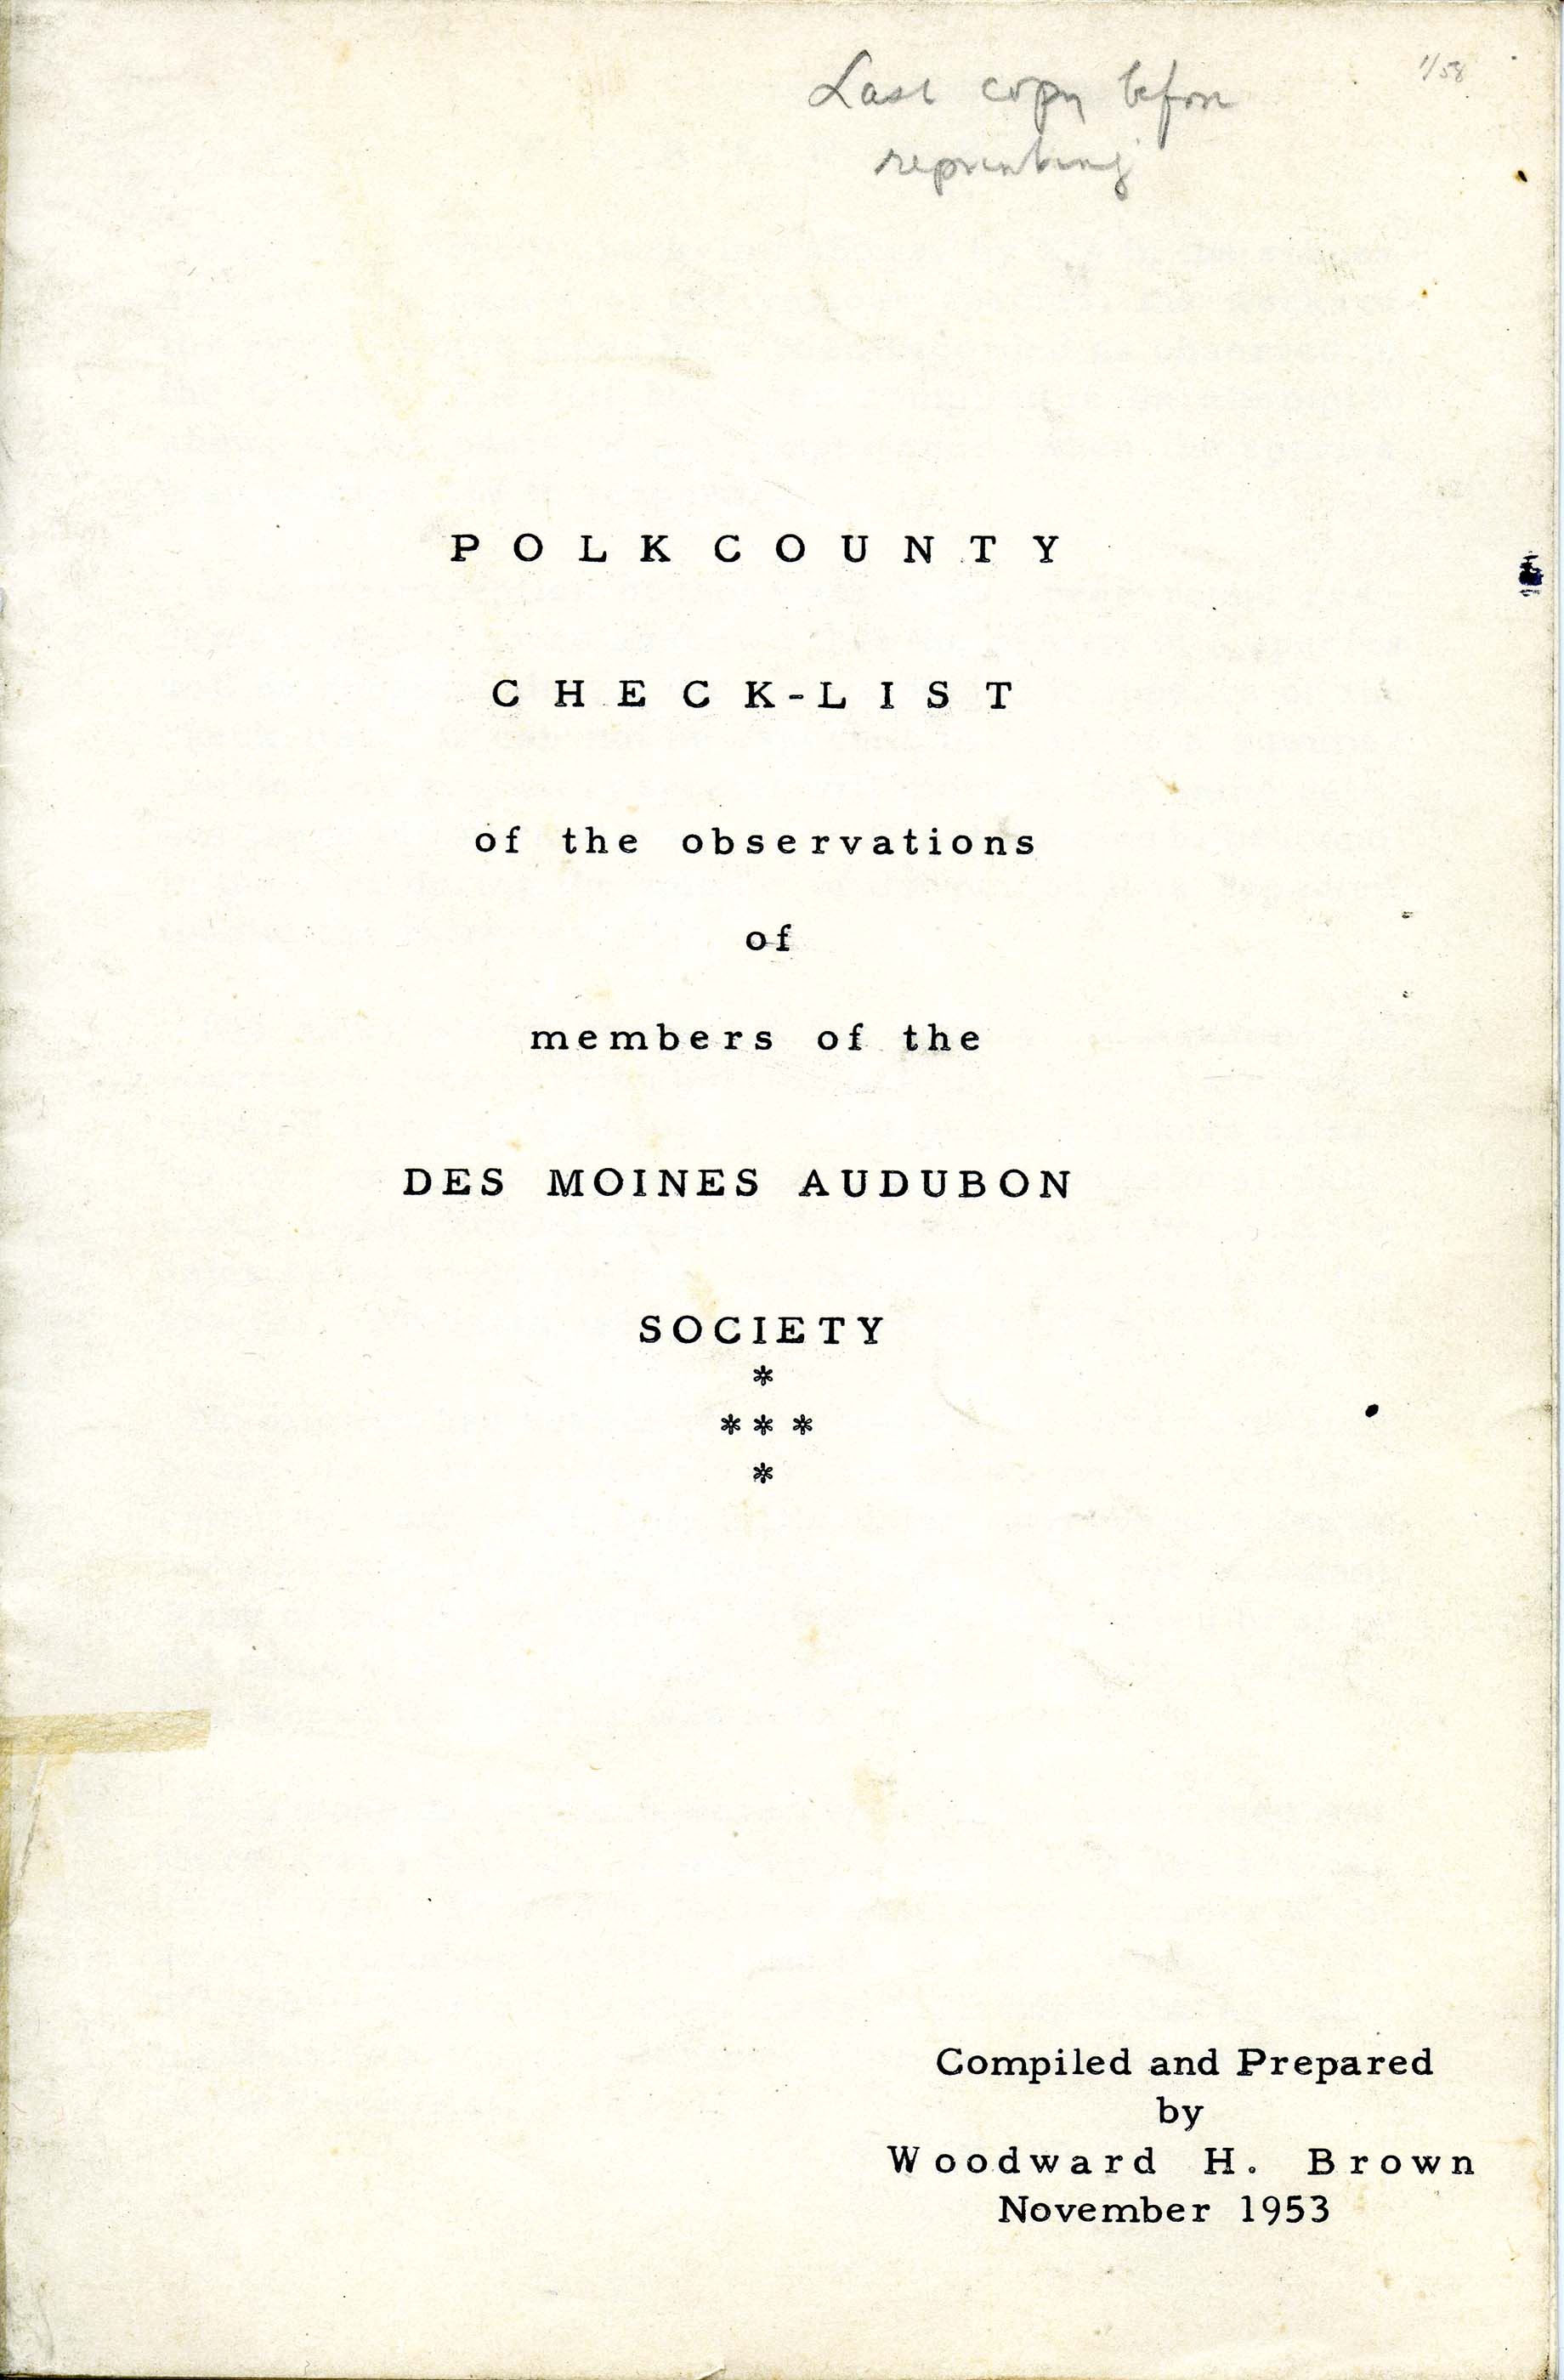 Annotated copy of Polk County check-list of the observations of members of the Des Moines Audubon Society, 1953